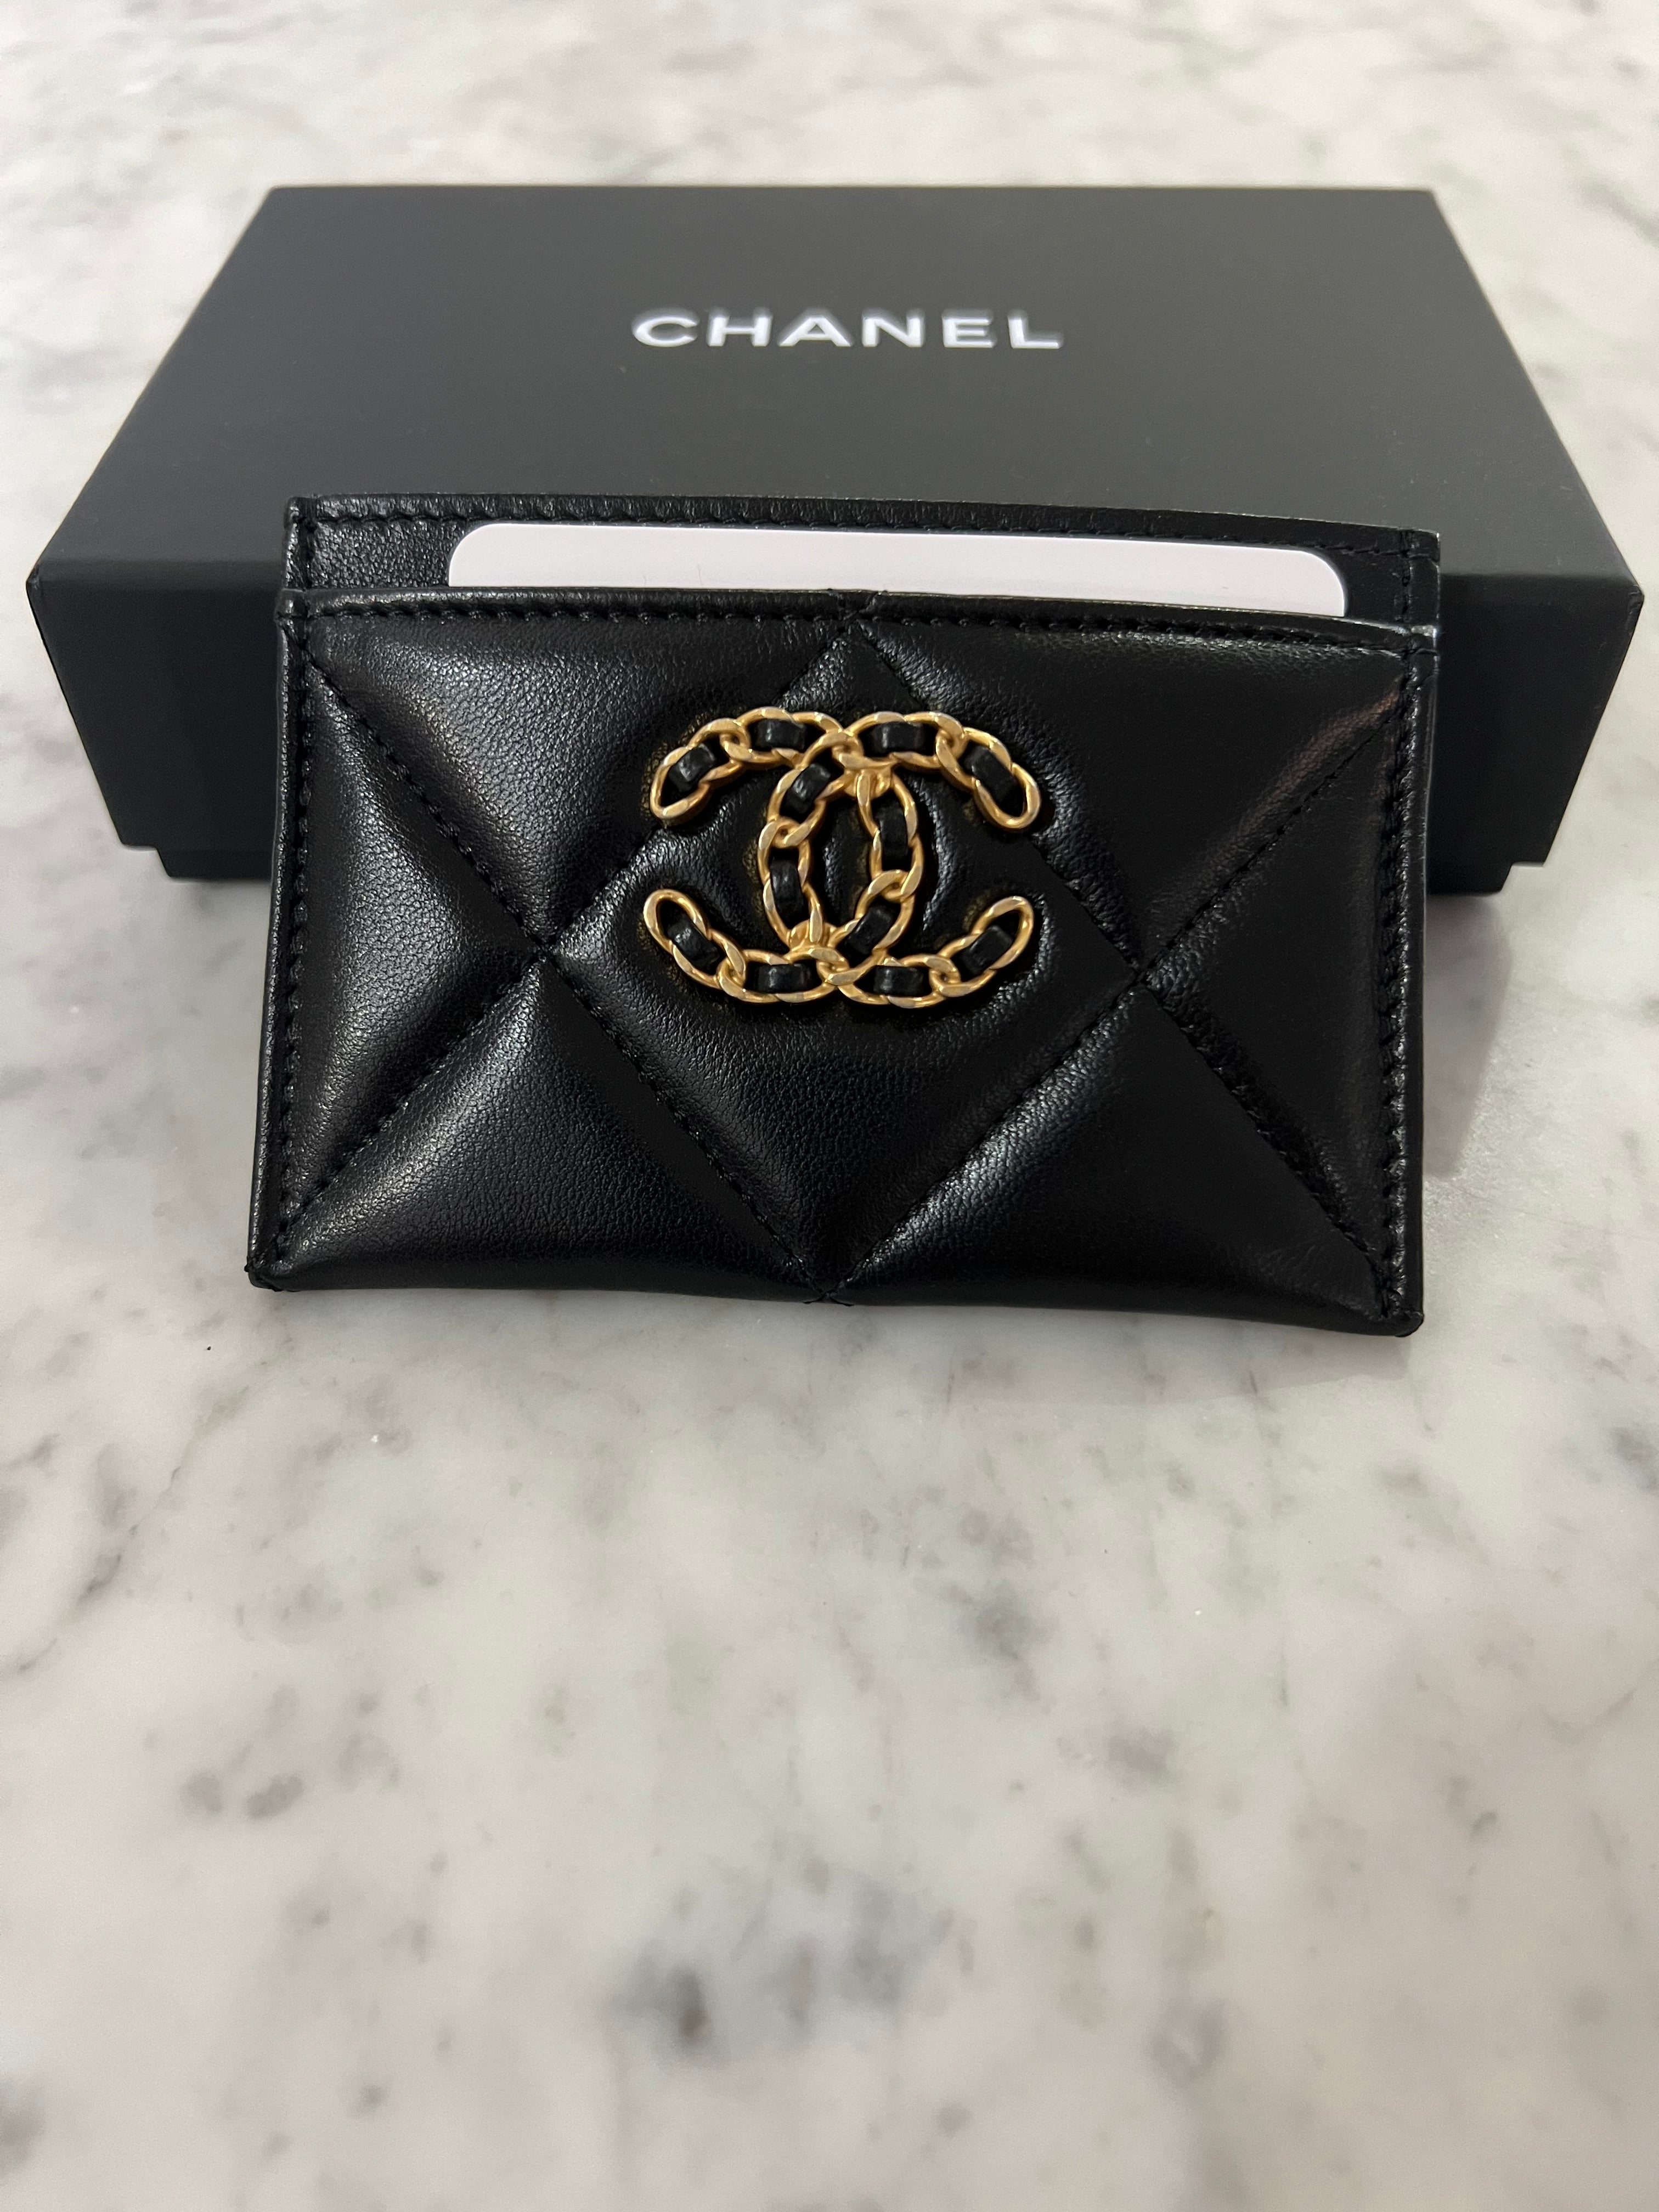 CHANEL 19 - Small Leather Goods